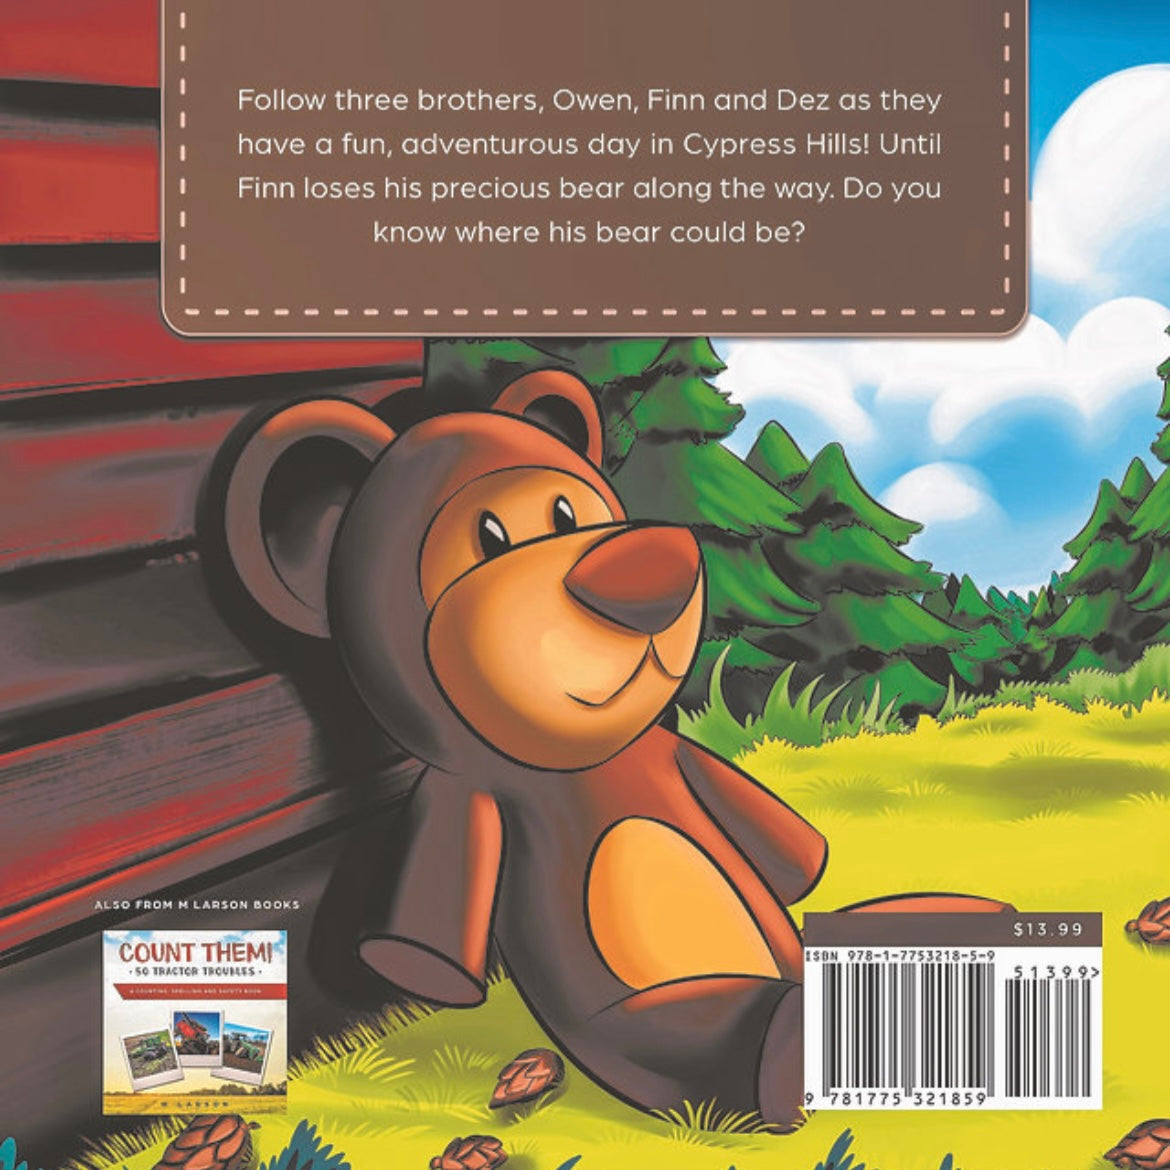 Children’s Book - The Day I lost My Bear In Cypress Hills